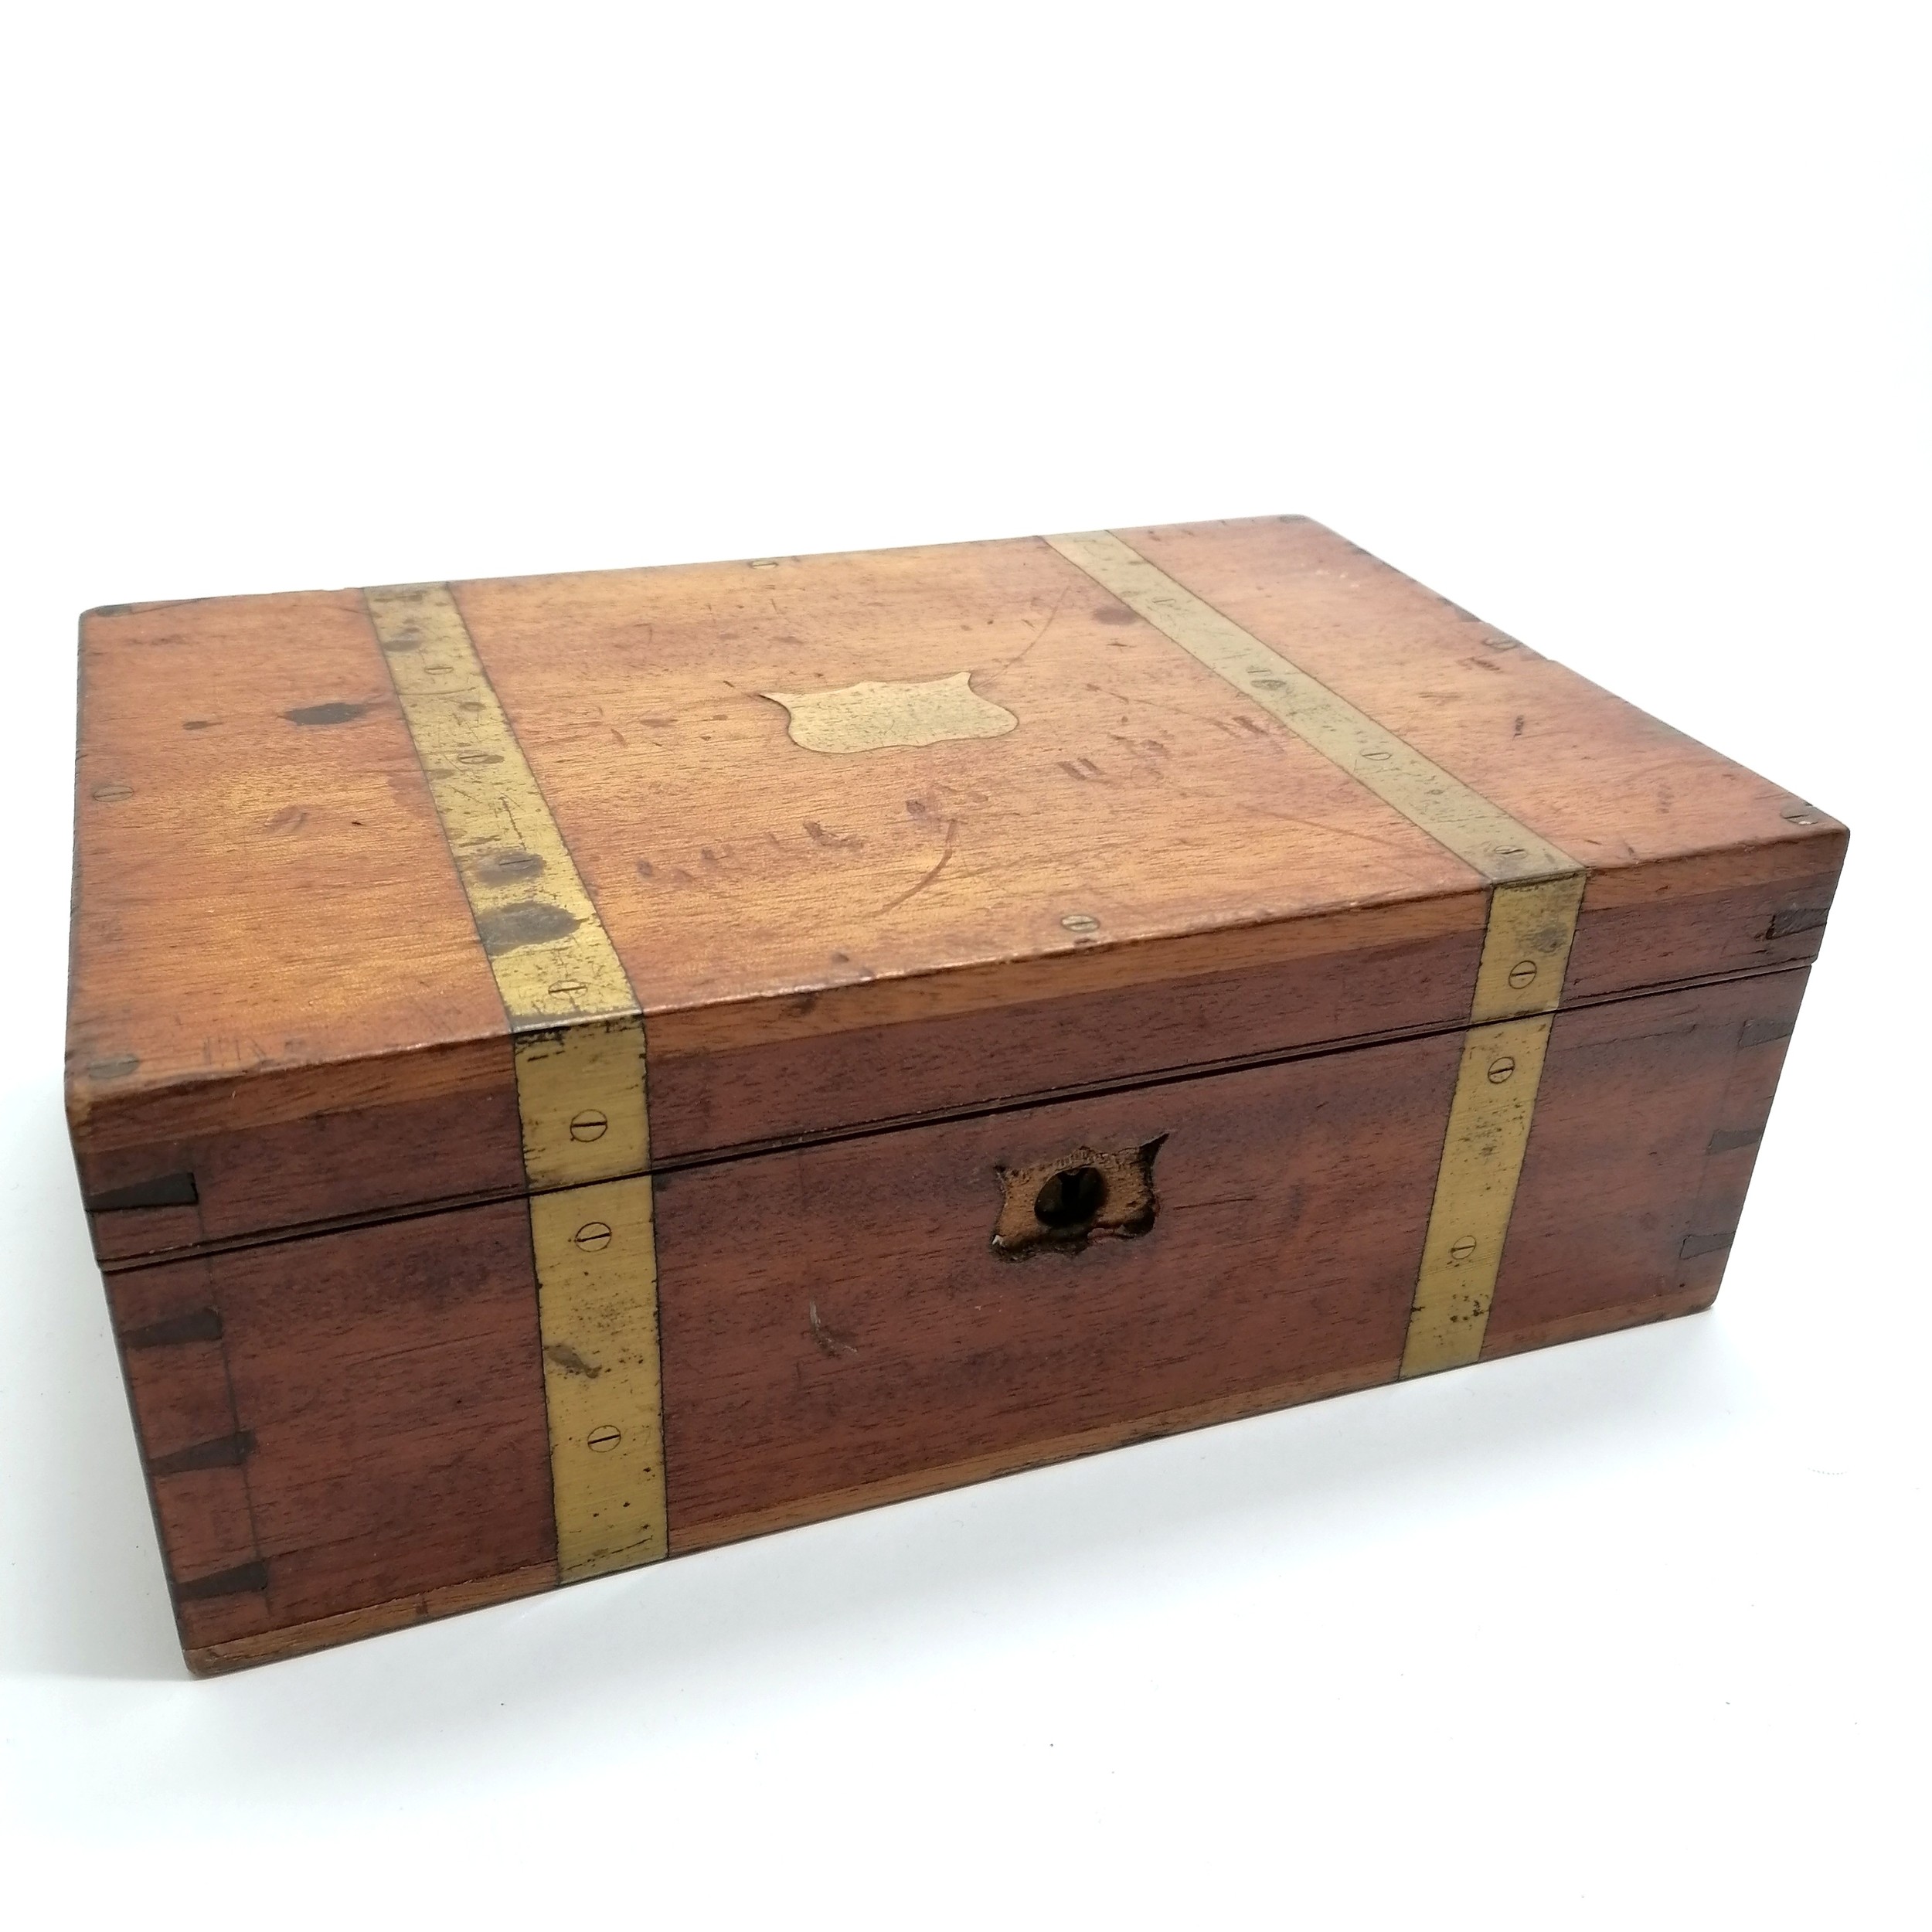 Antique mahogany & brass bounded medical box by Down Brothers (opposite Guys Hospital) with life out - Image 8 of 8